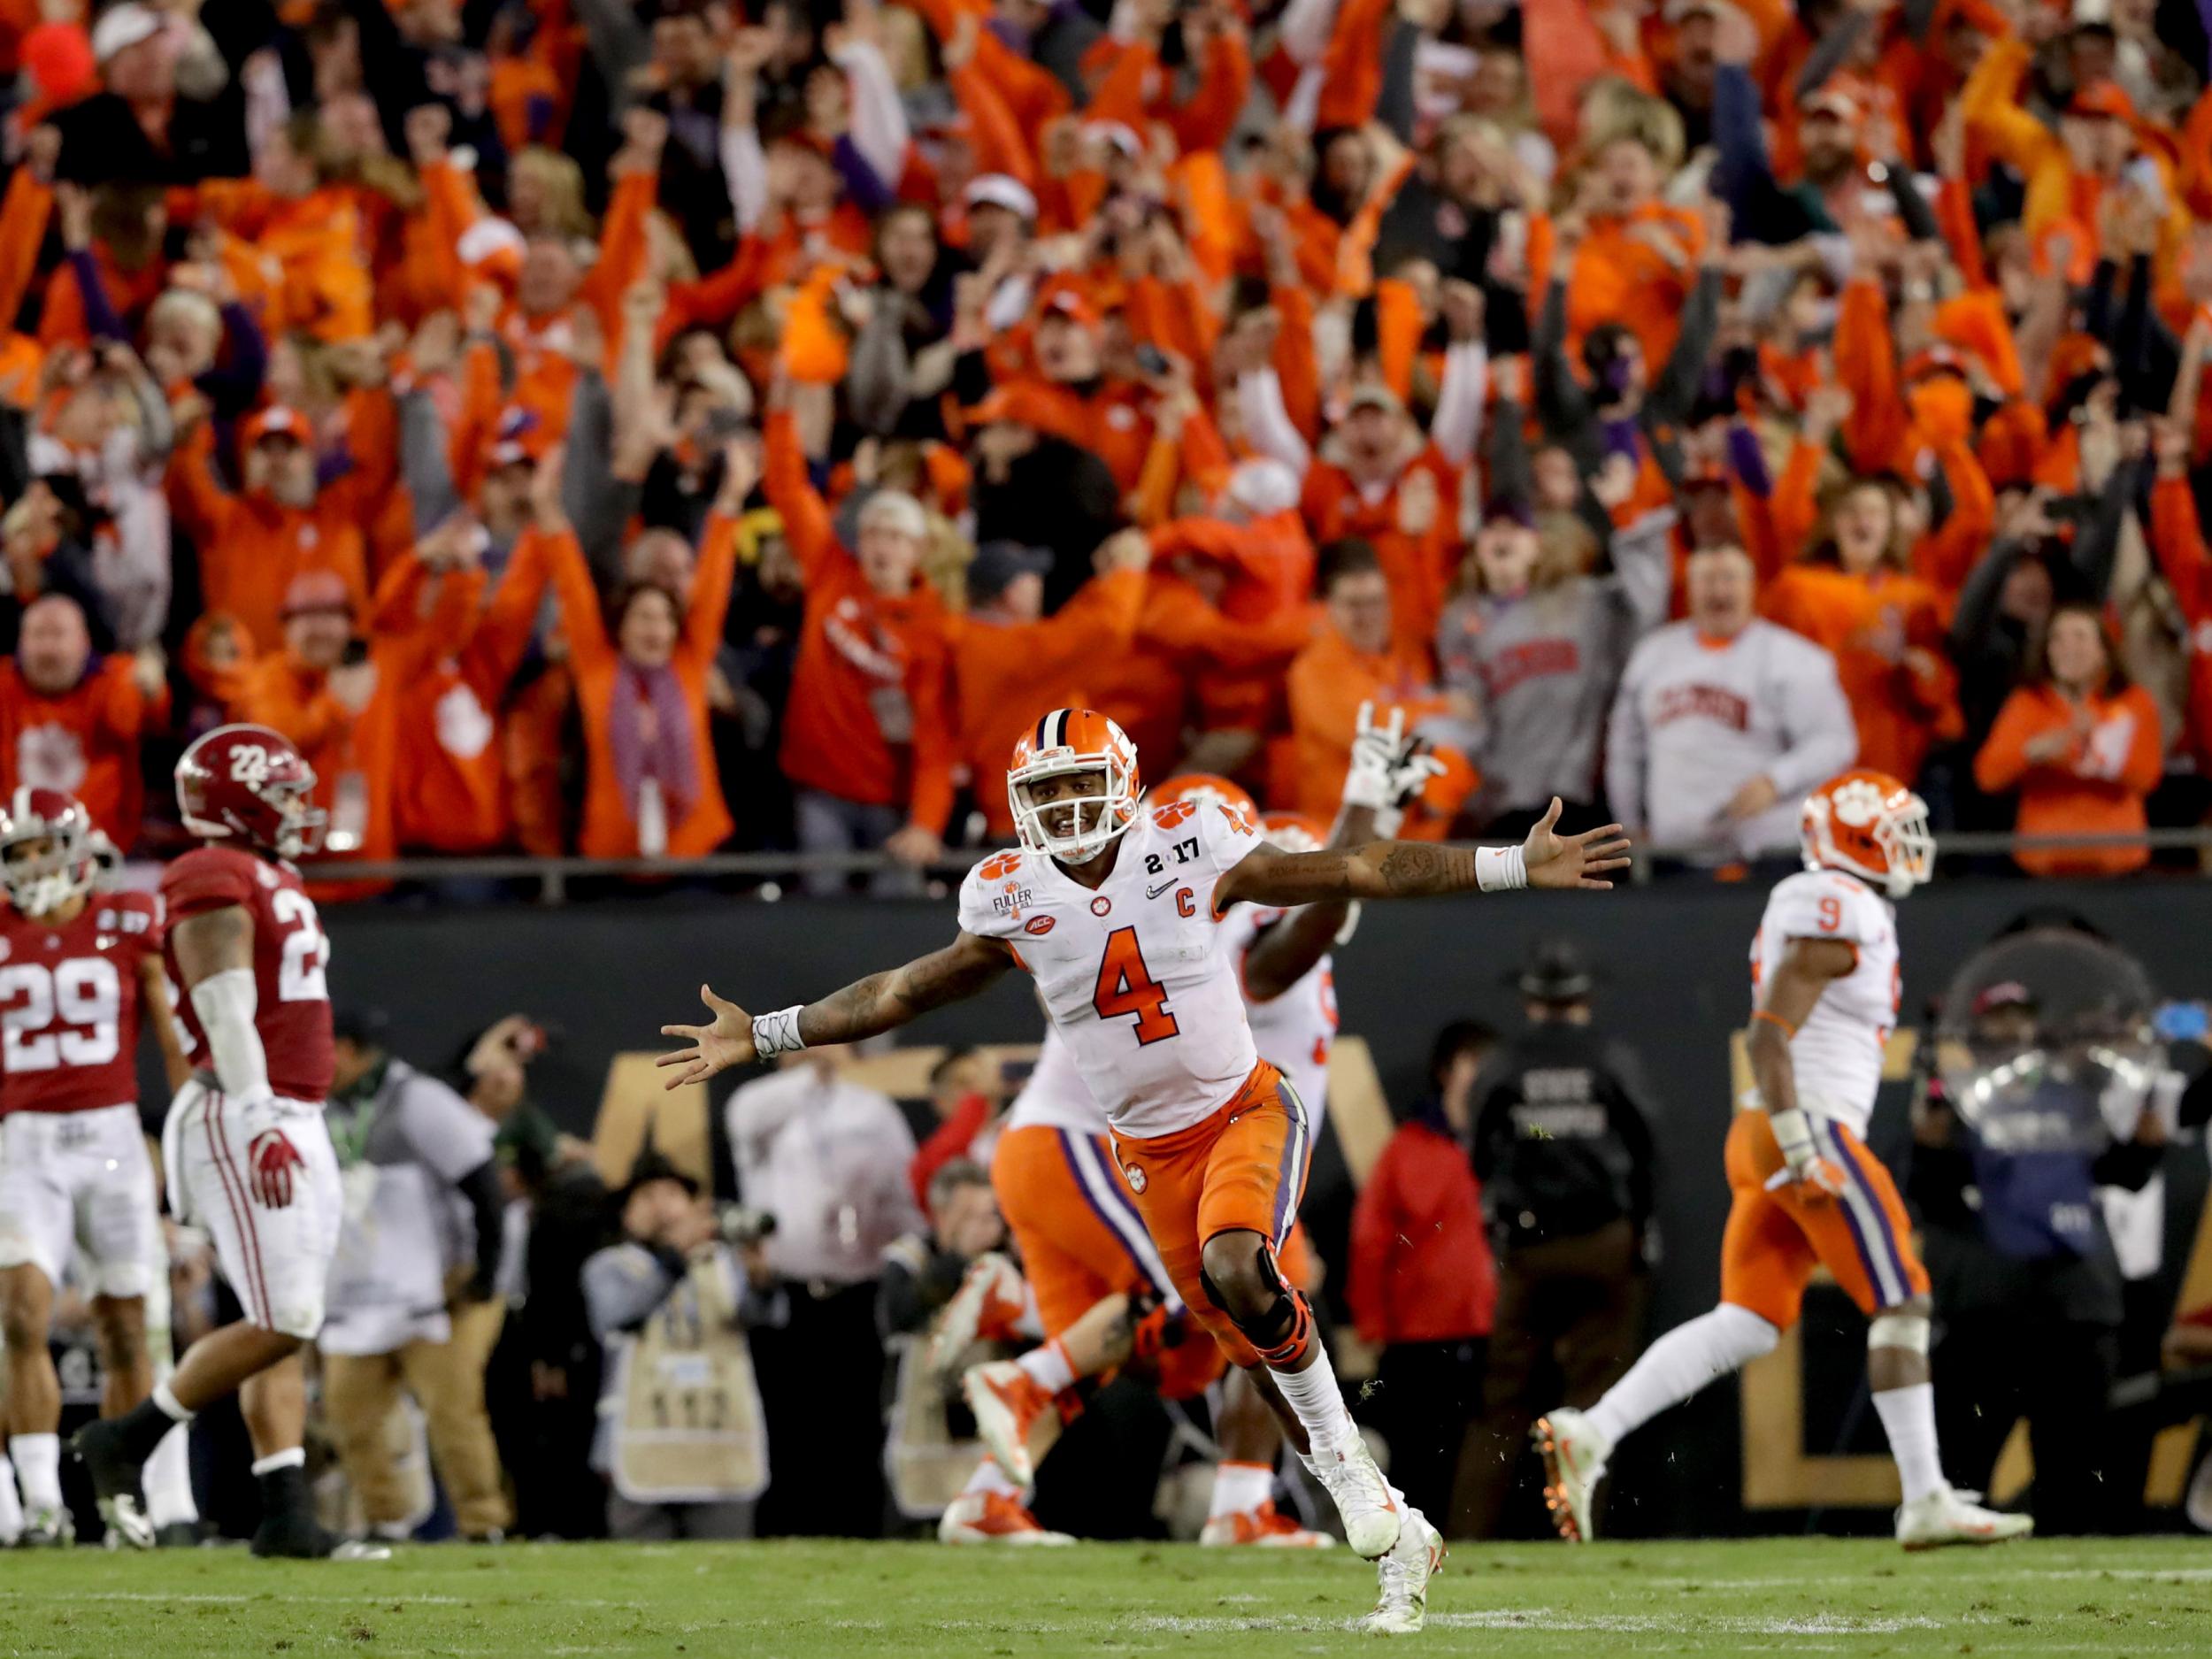 &#13;
Deshaun Watson won everything as a college QB but will that transition to the NFL? (Getty)&#13;